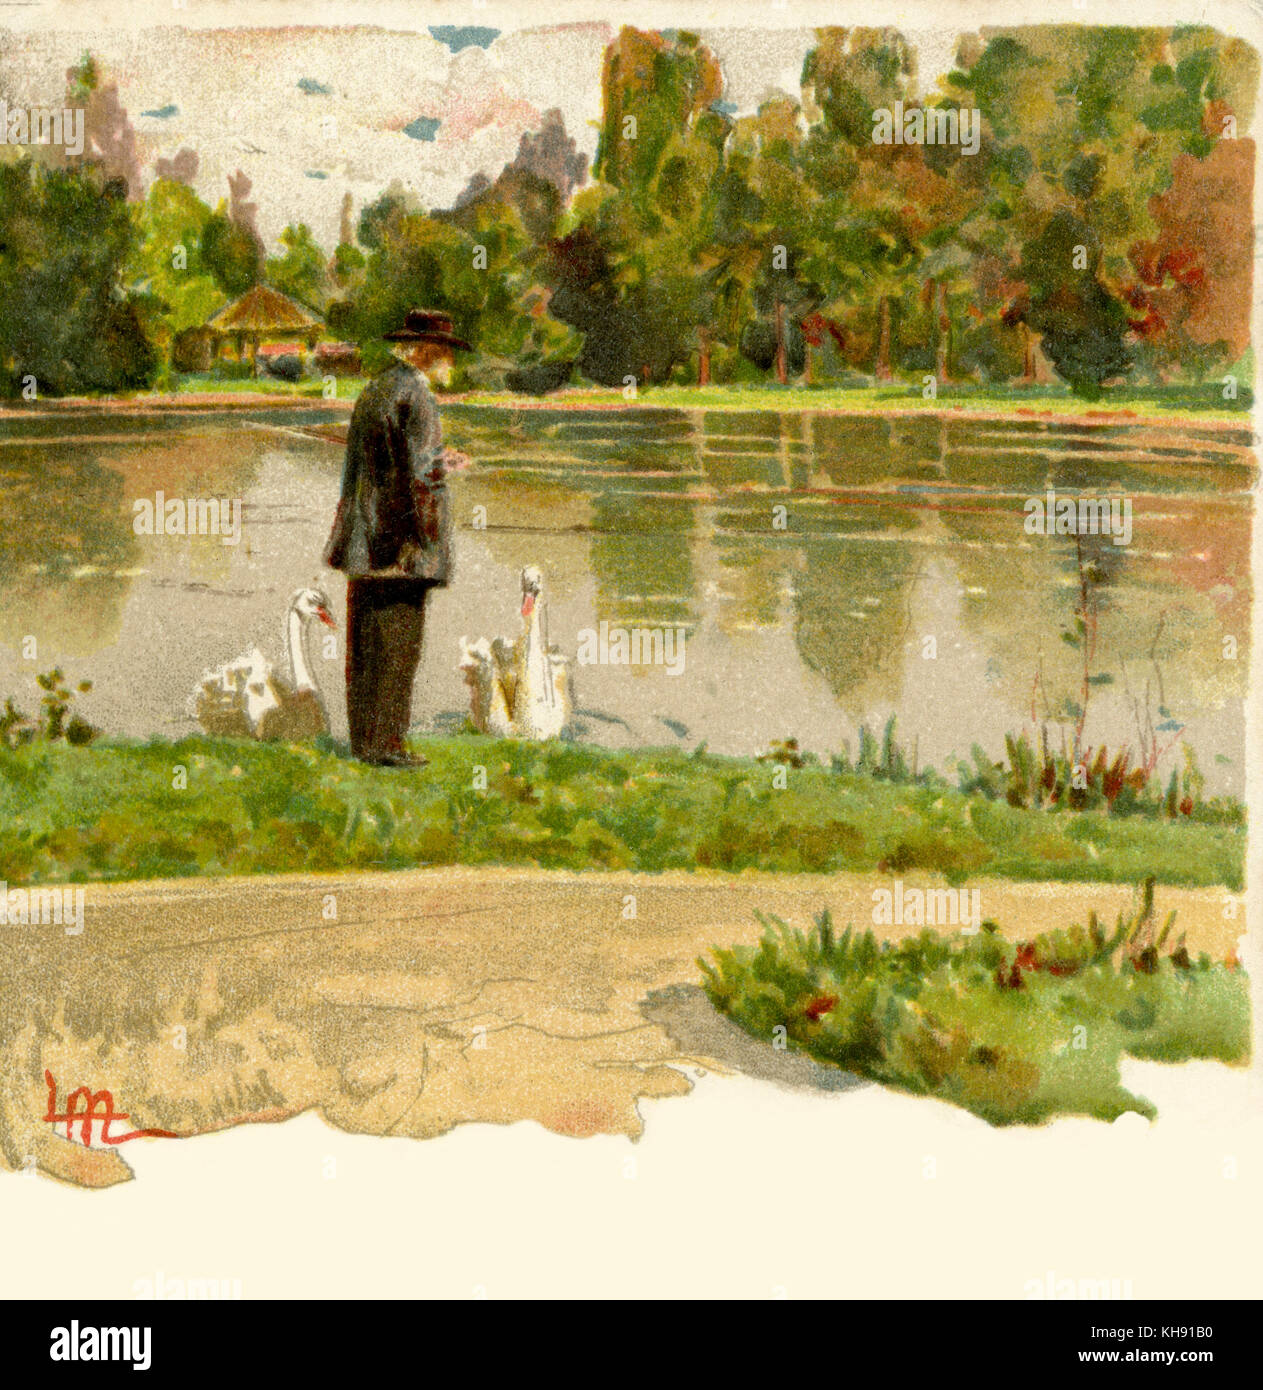 Giuseppe Verdi with the swans.   Italian composer,  9 or 10 October 1813 - 27 January 1901. Stock Photo